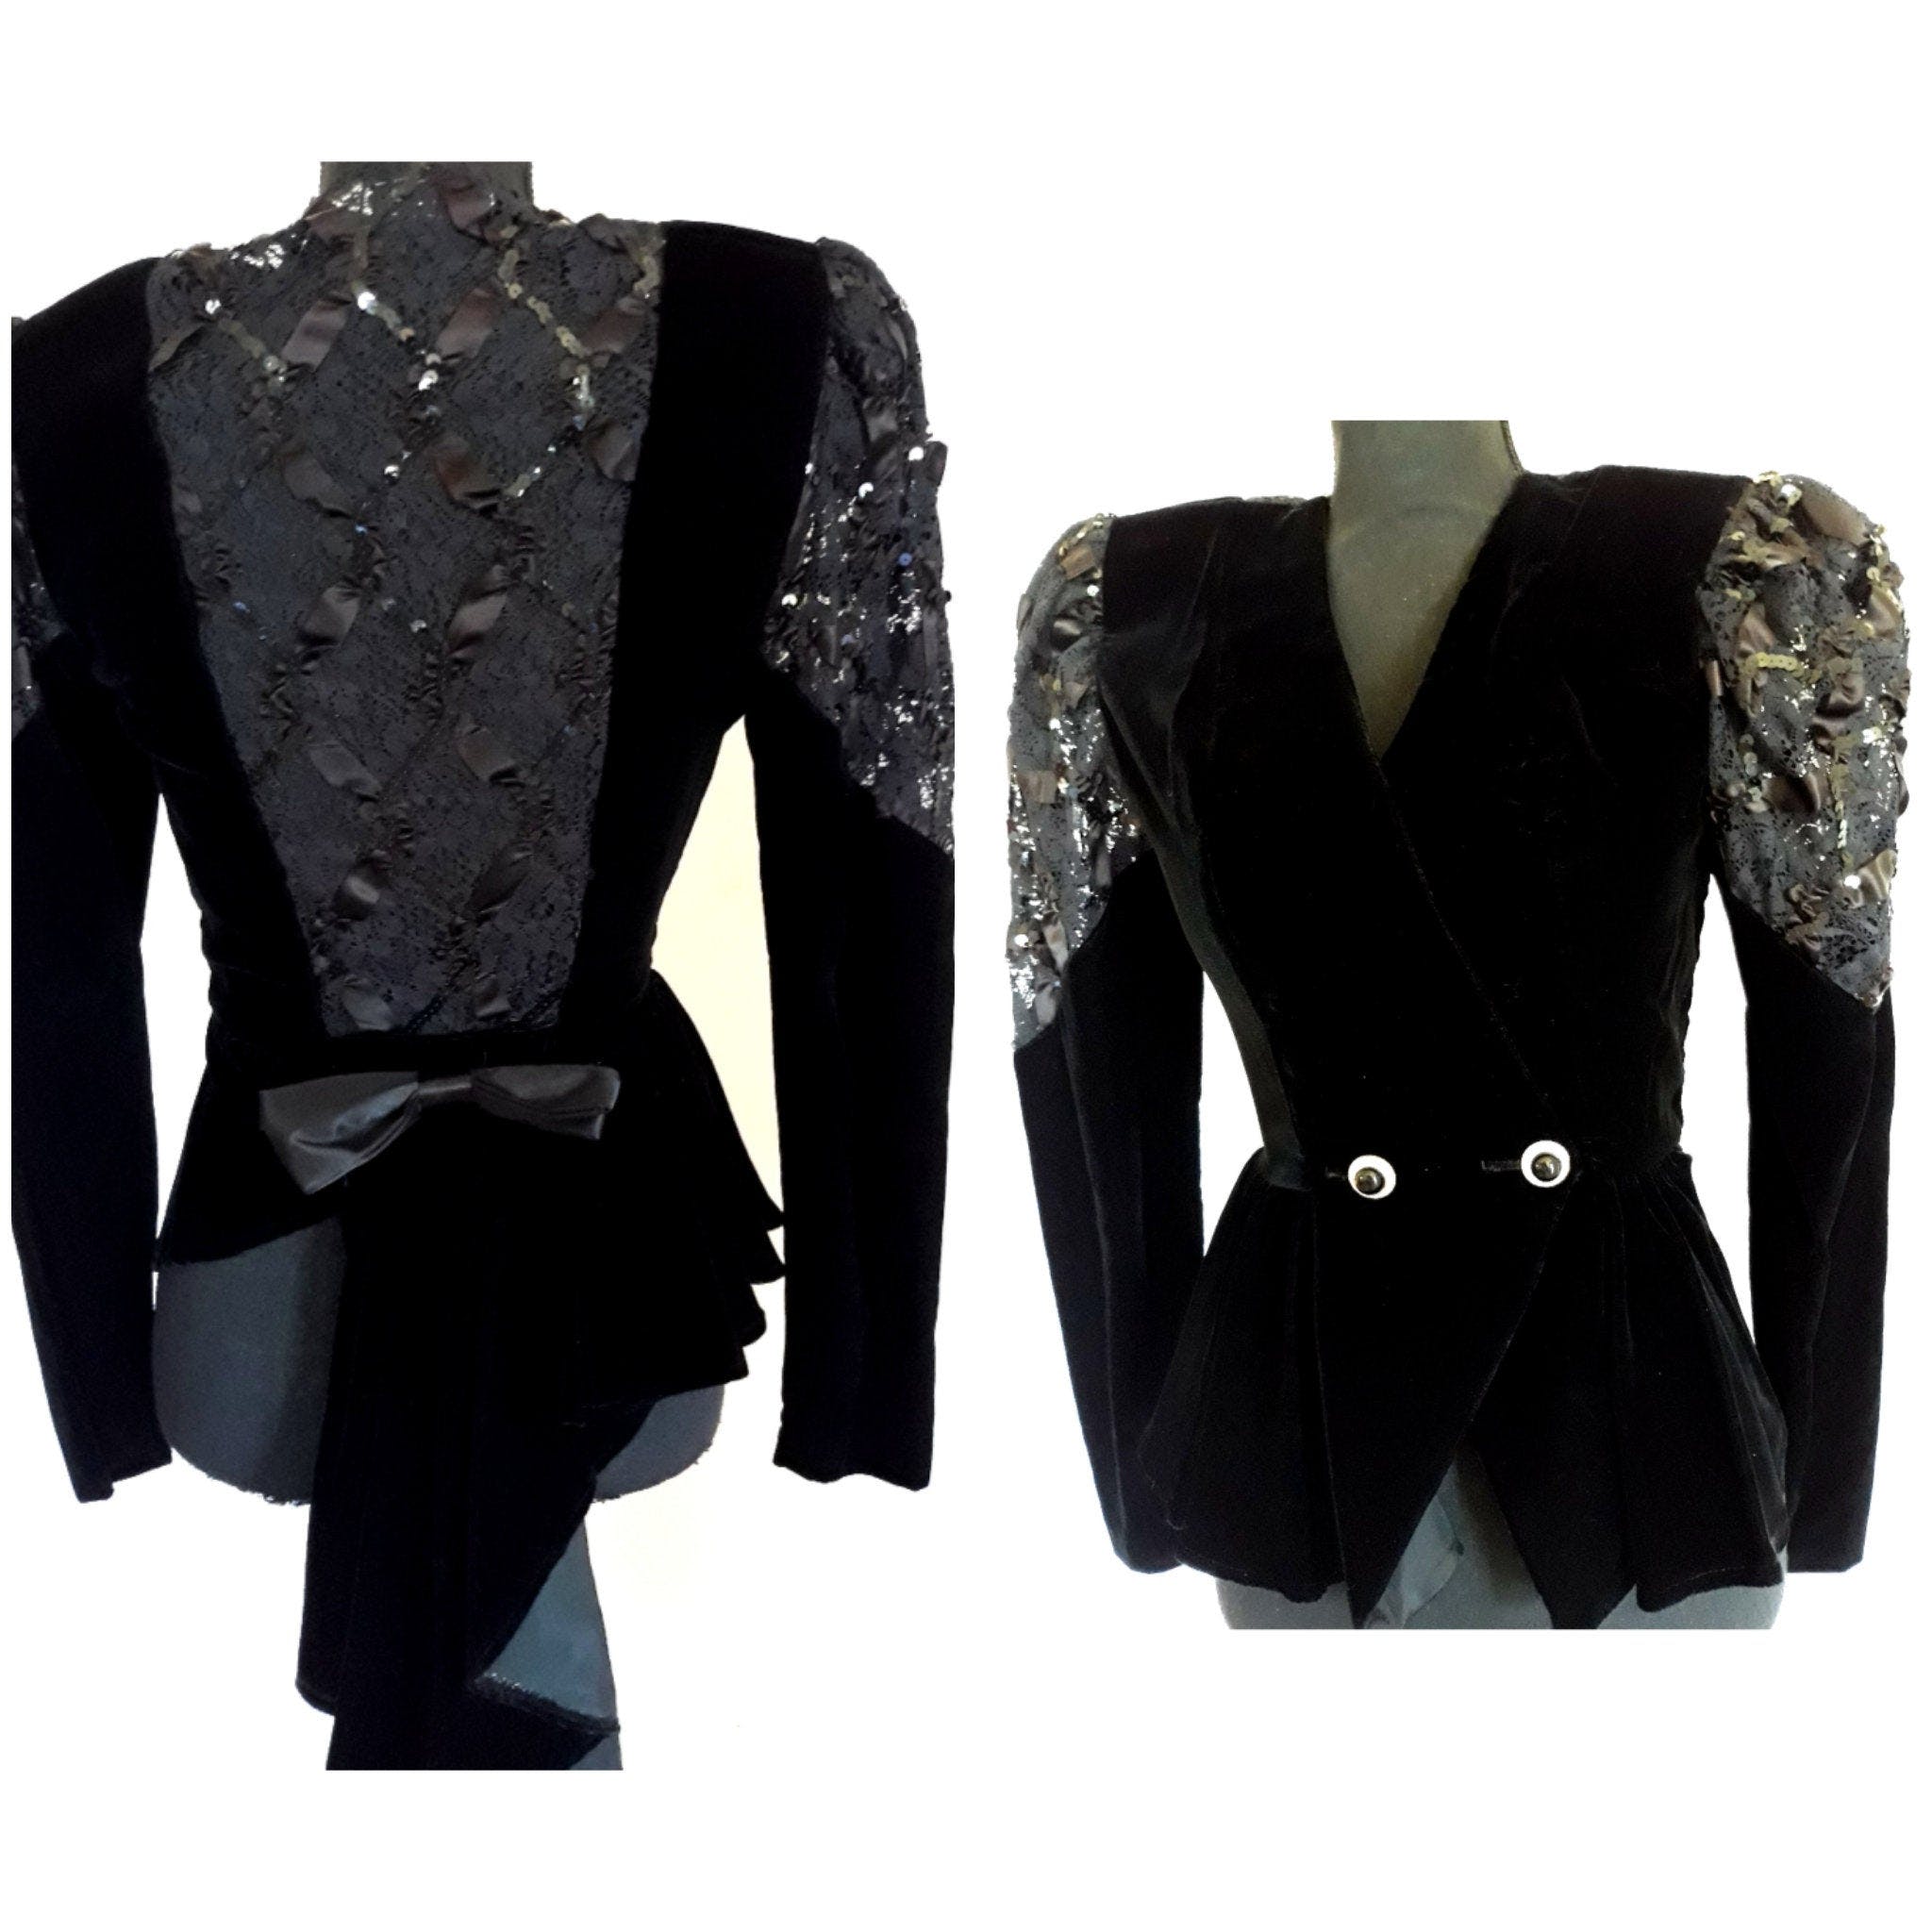 Vintage 1980's Black Victorian Style Long Sleeve Top | Shop THRILLING